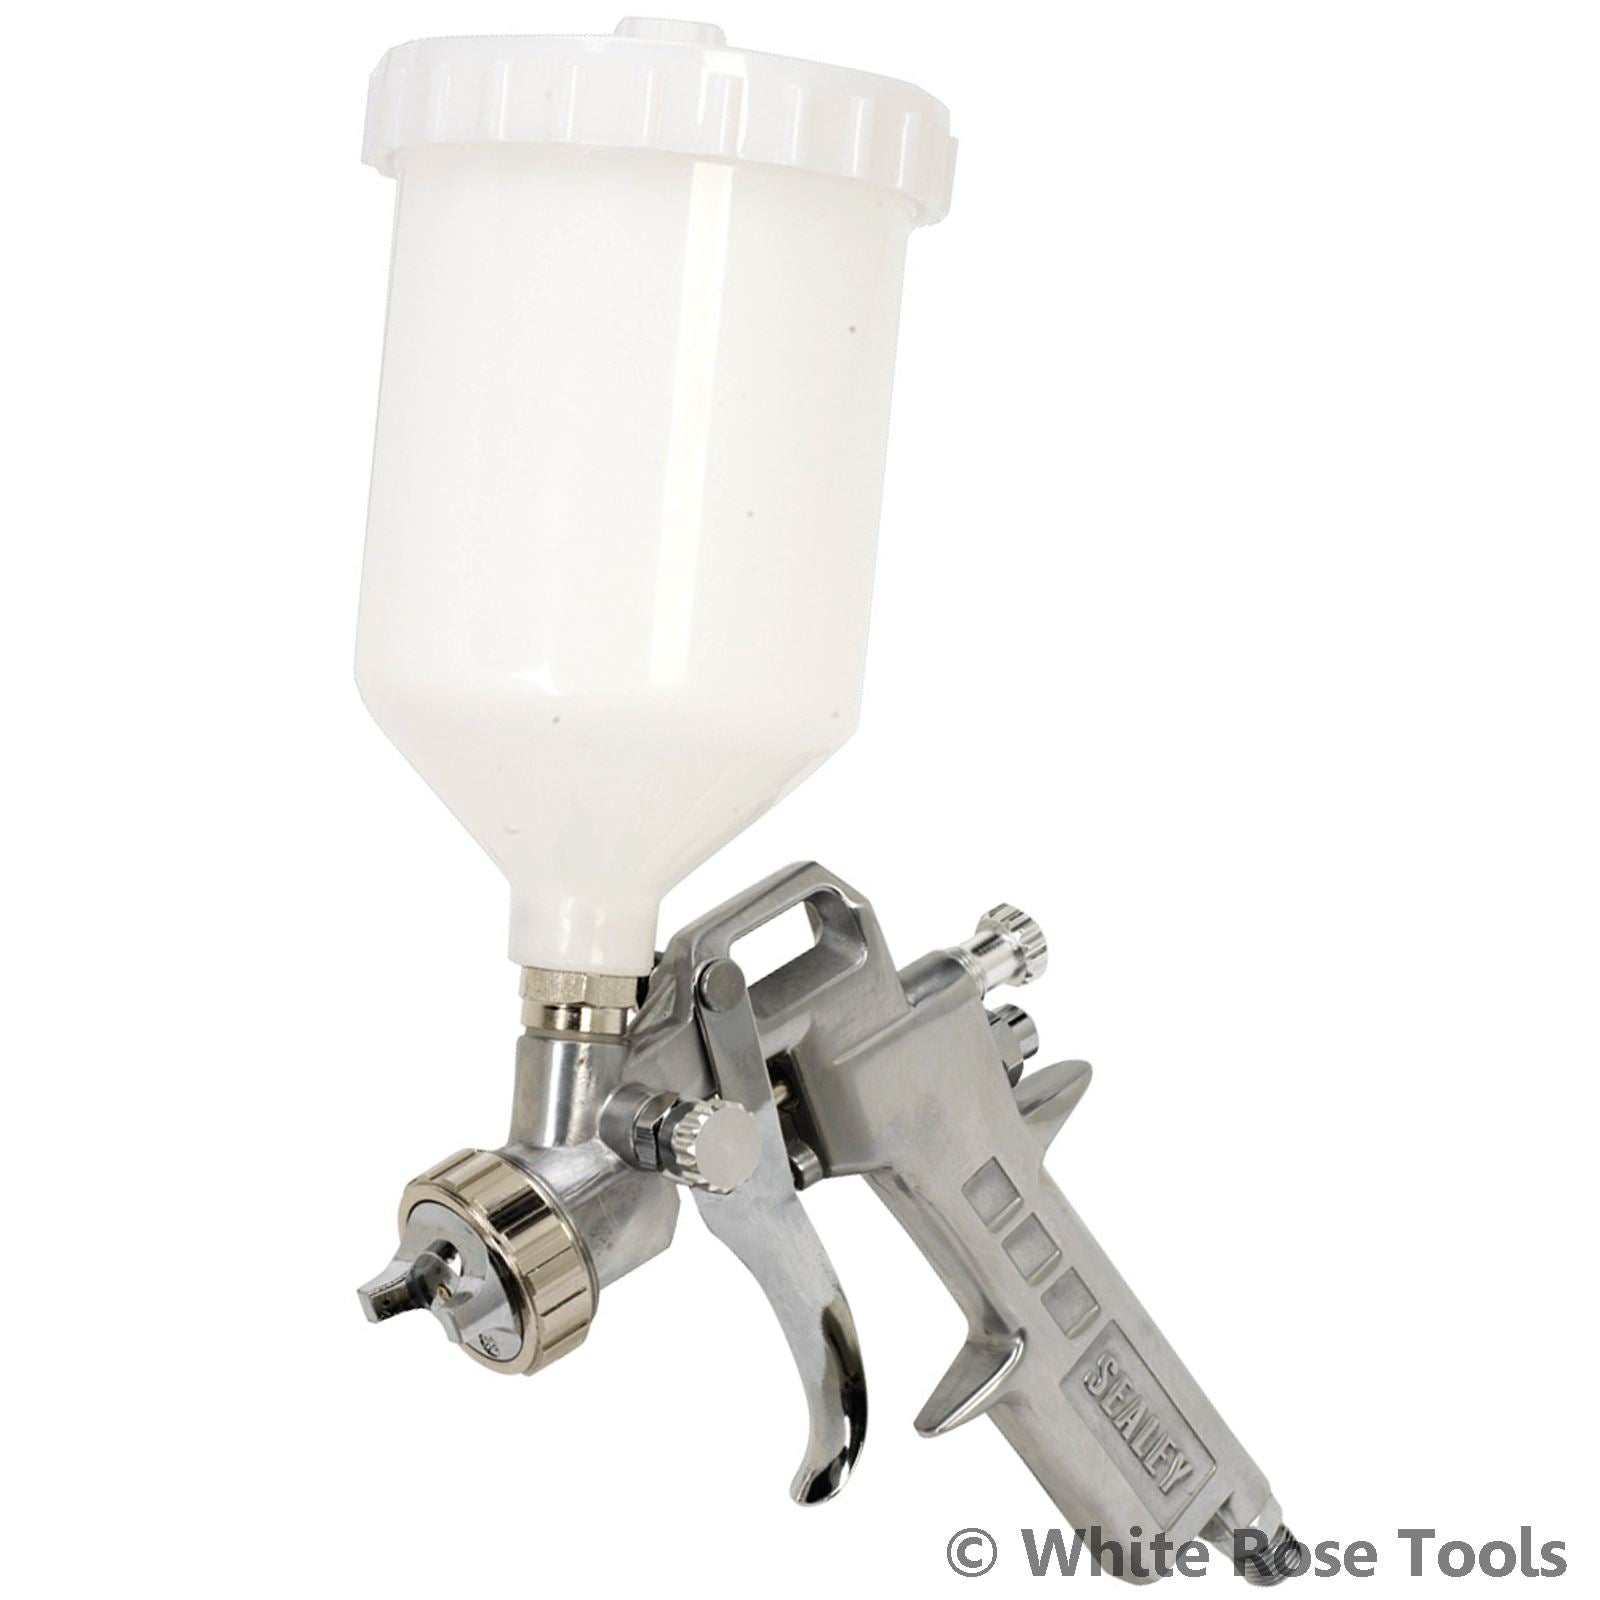 Sealey Gravity Feed Spray Gun with 1.8mm Set Up Adjustable Paint Flow